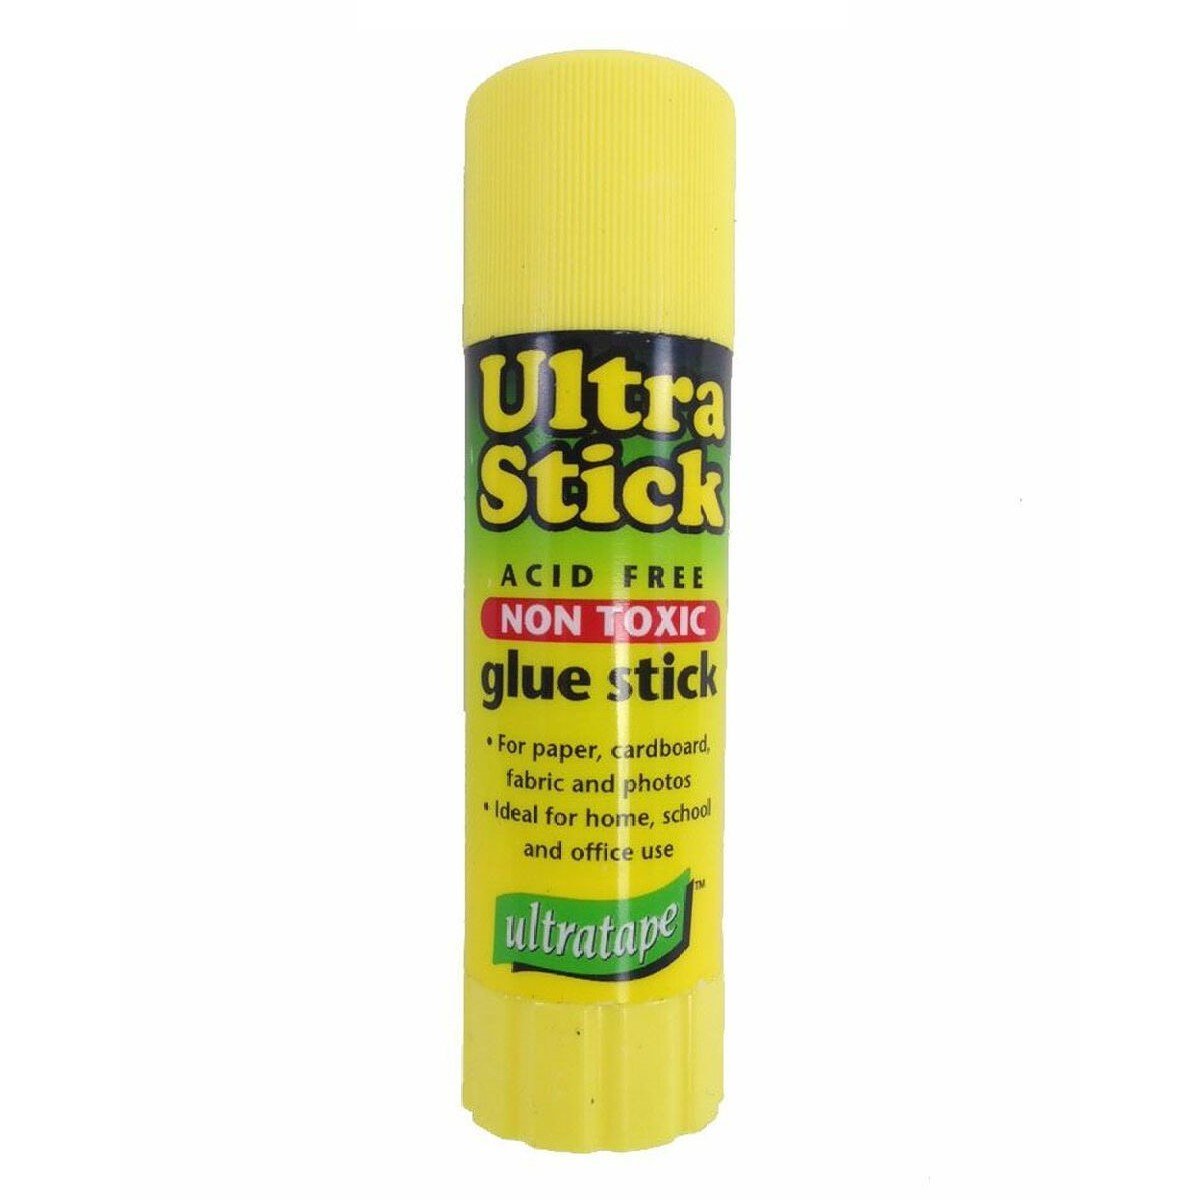 Ultra Stick Glue Stick 15g - Perfect for Glass Beds - No More Adhesion Issues